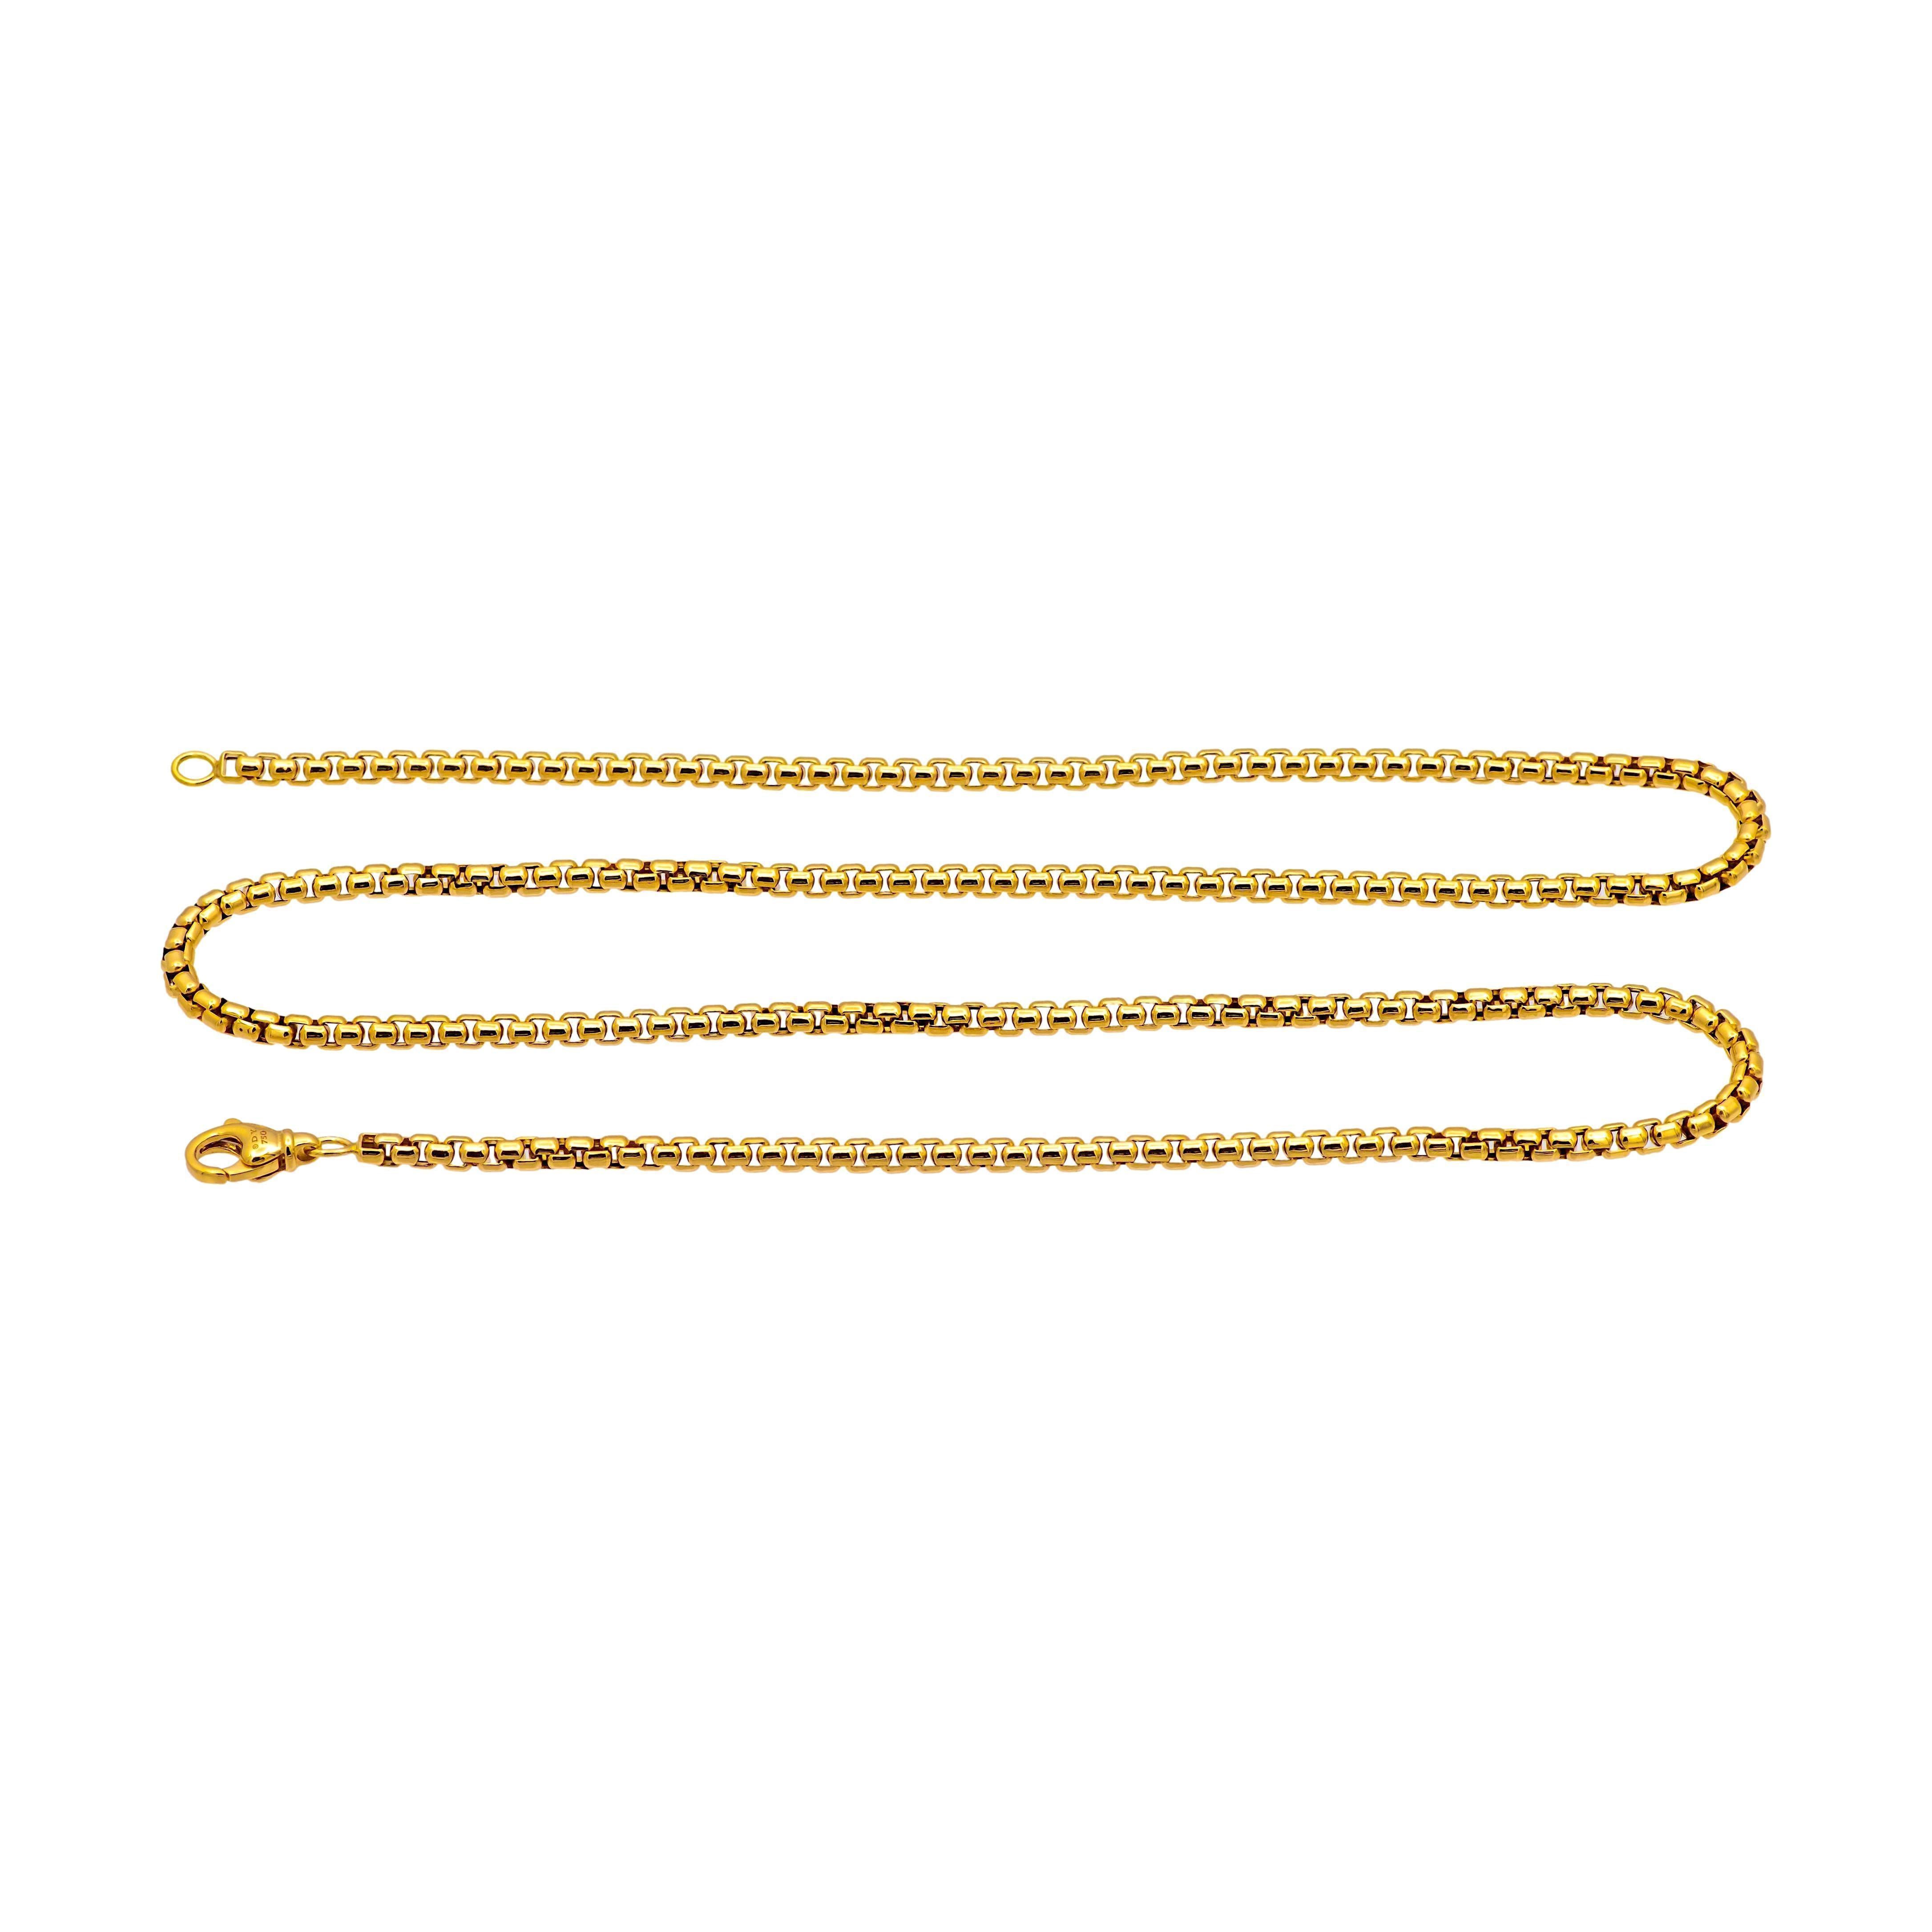 David Yurman necklace from the Chain collection for Men finely crafted in 18 karat yellow gold featuring a box link design measuring 3.4 mm wide and 26 inches long with a large lobster claw closure. Fully hallmarked with logo and metal